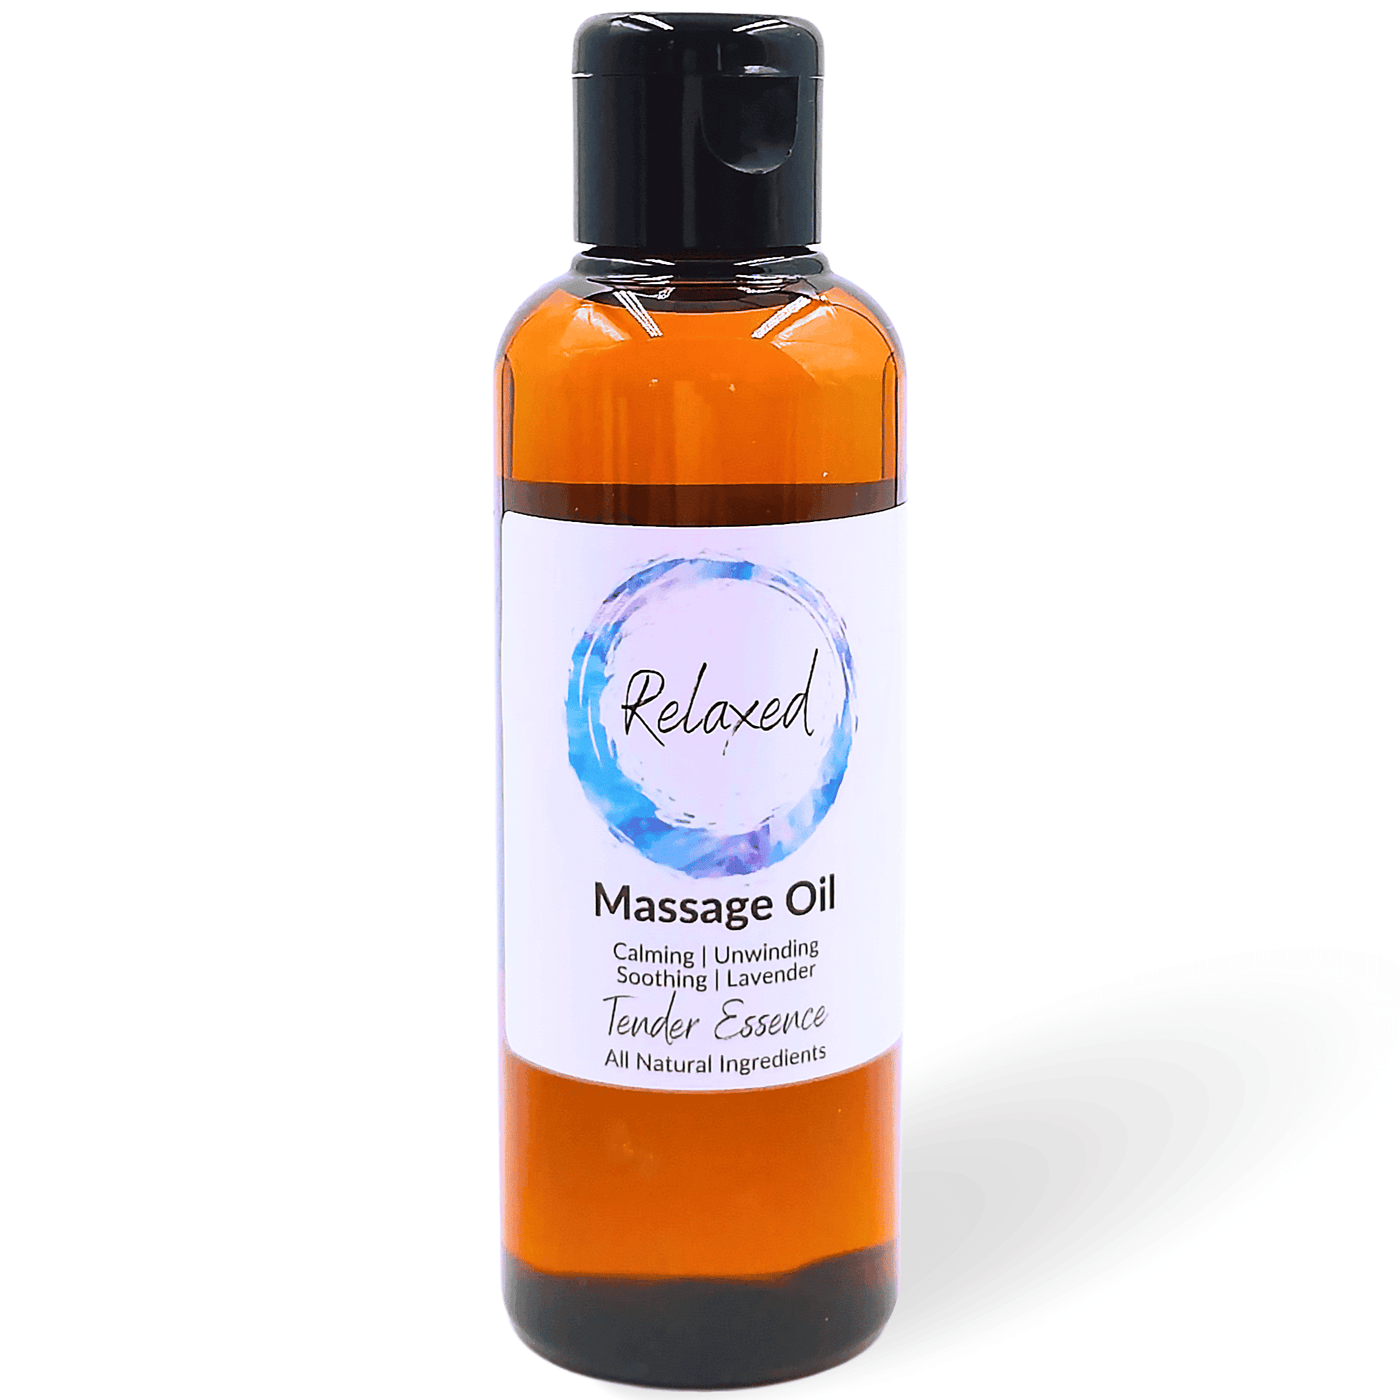 Relaxed Massage Oil